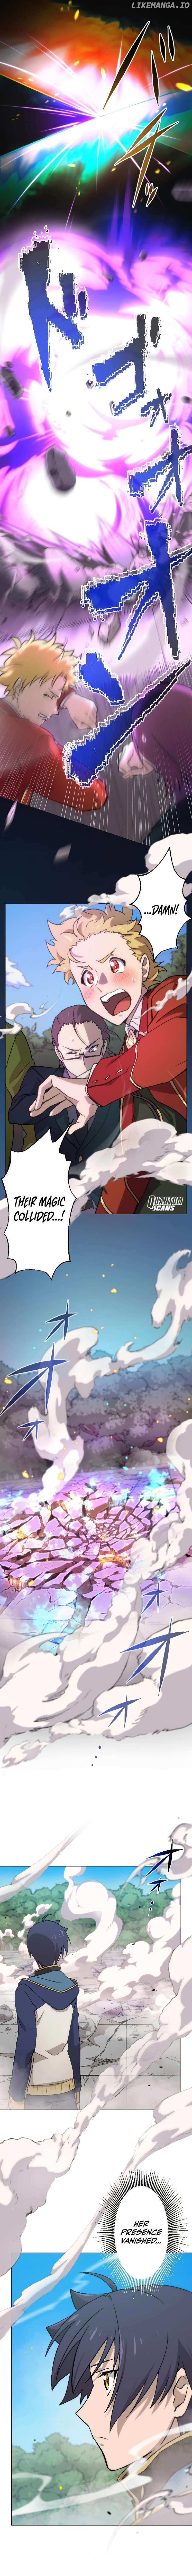 The Reincarnated Magician with Inferior Eyes ~The Oppressed Ex-Hero Survives the Future World with Ease~ Chapter 12 - page 3